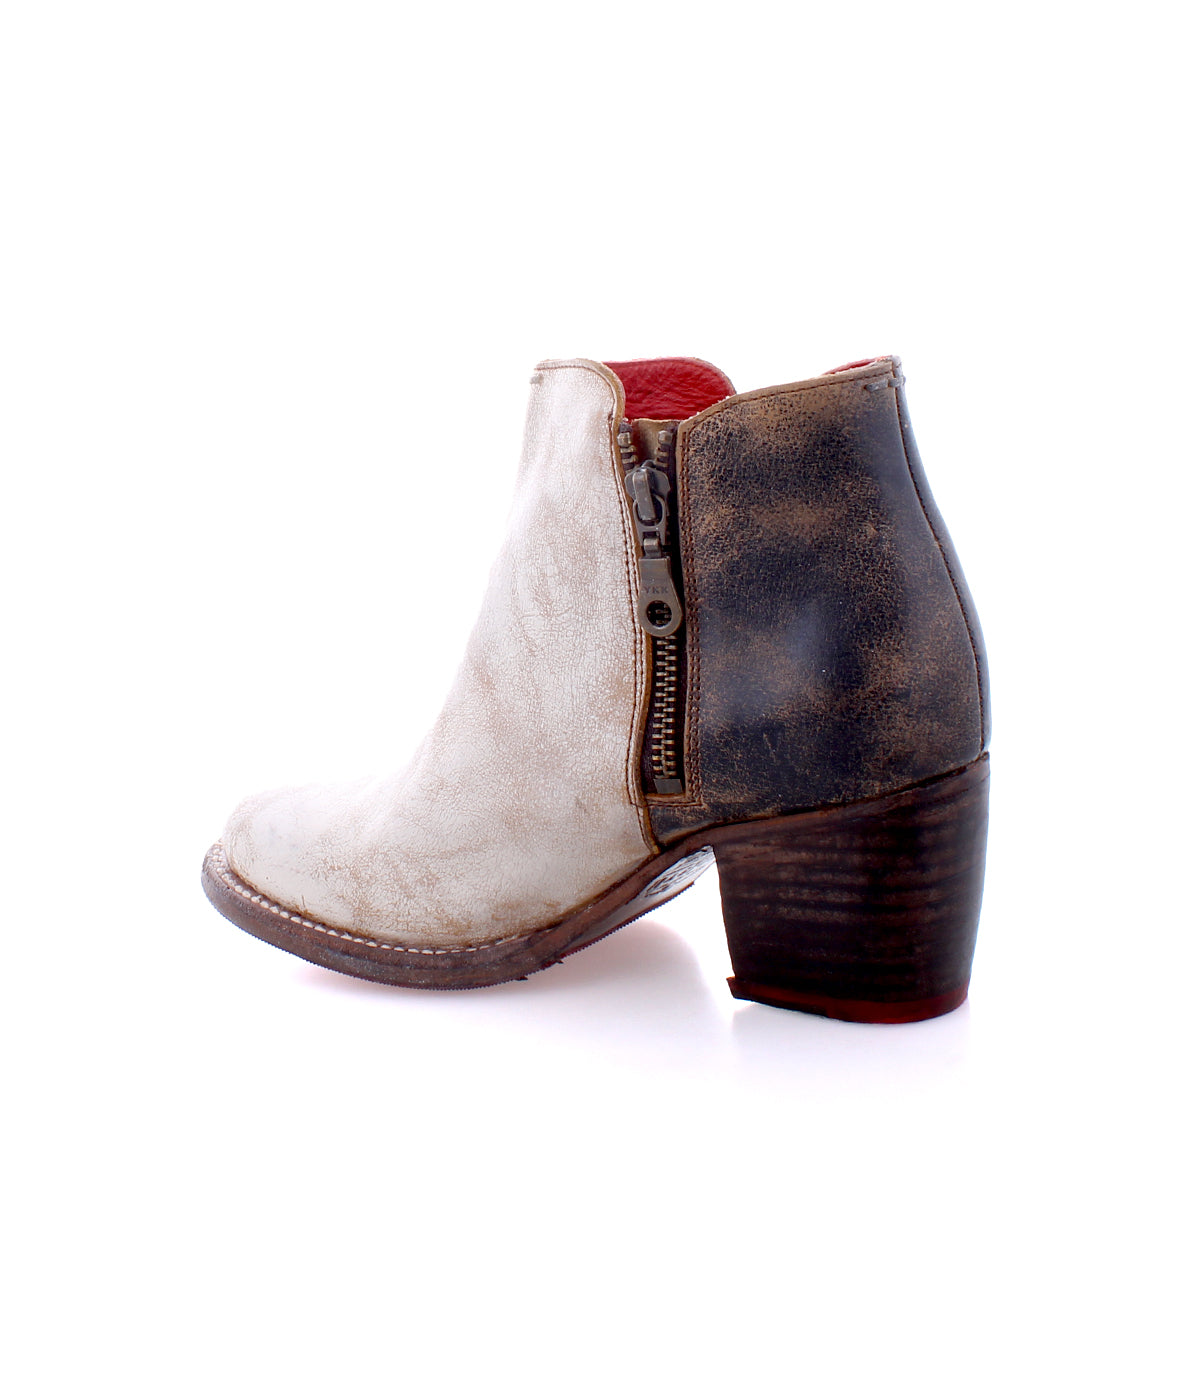 A women's ankle boot with a durable leather construction and side zipper, the Bed Stu Yell.